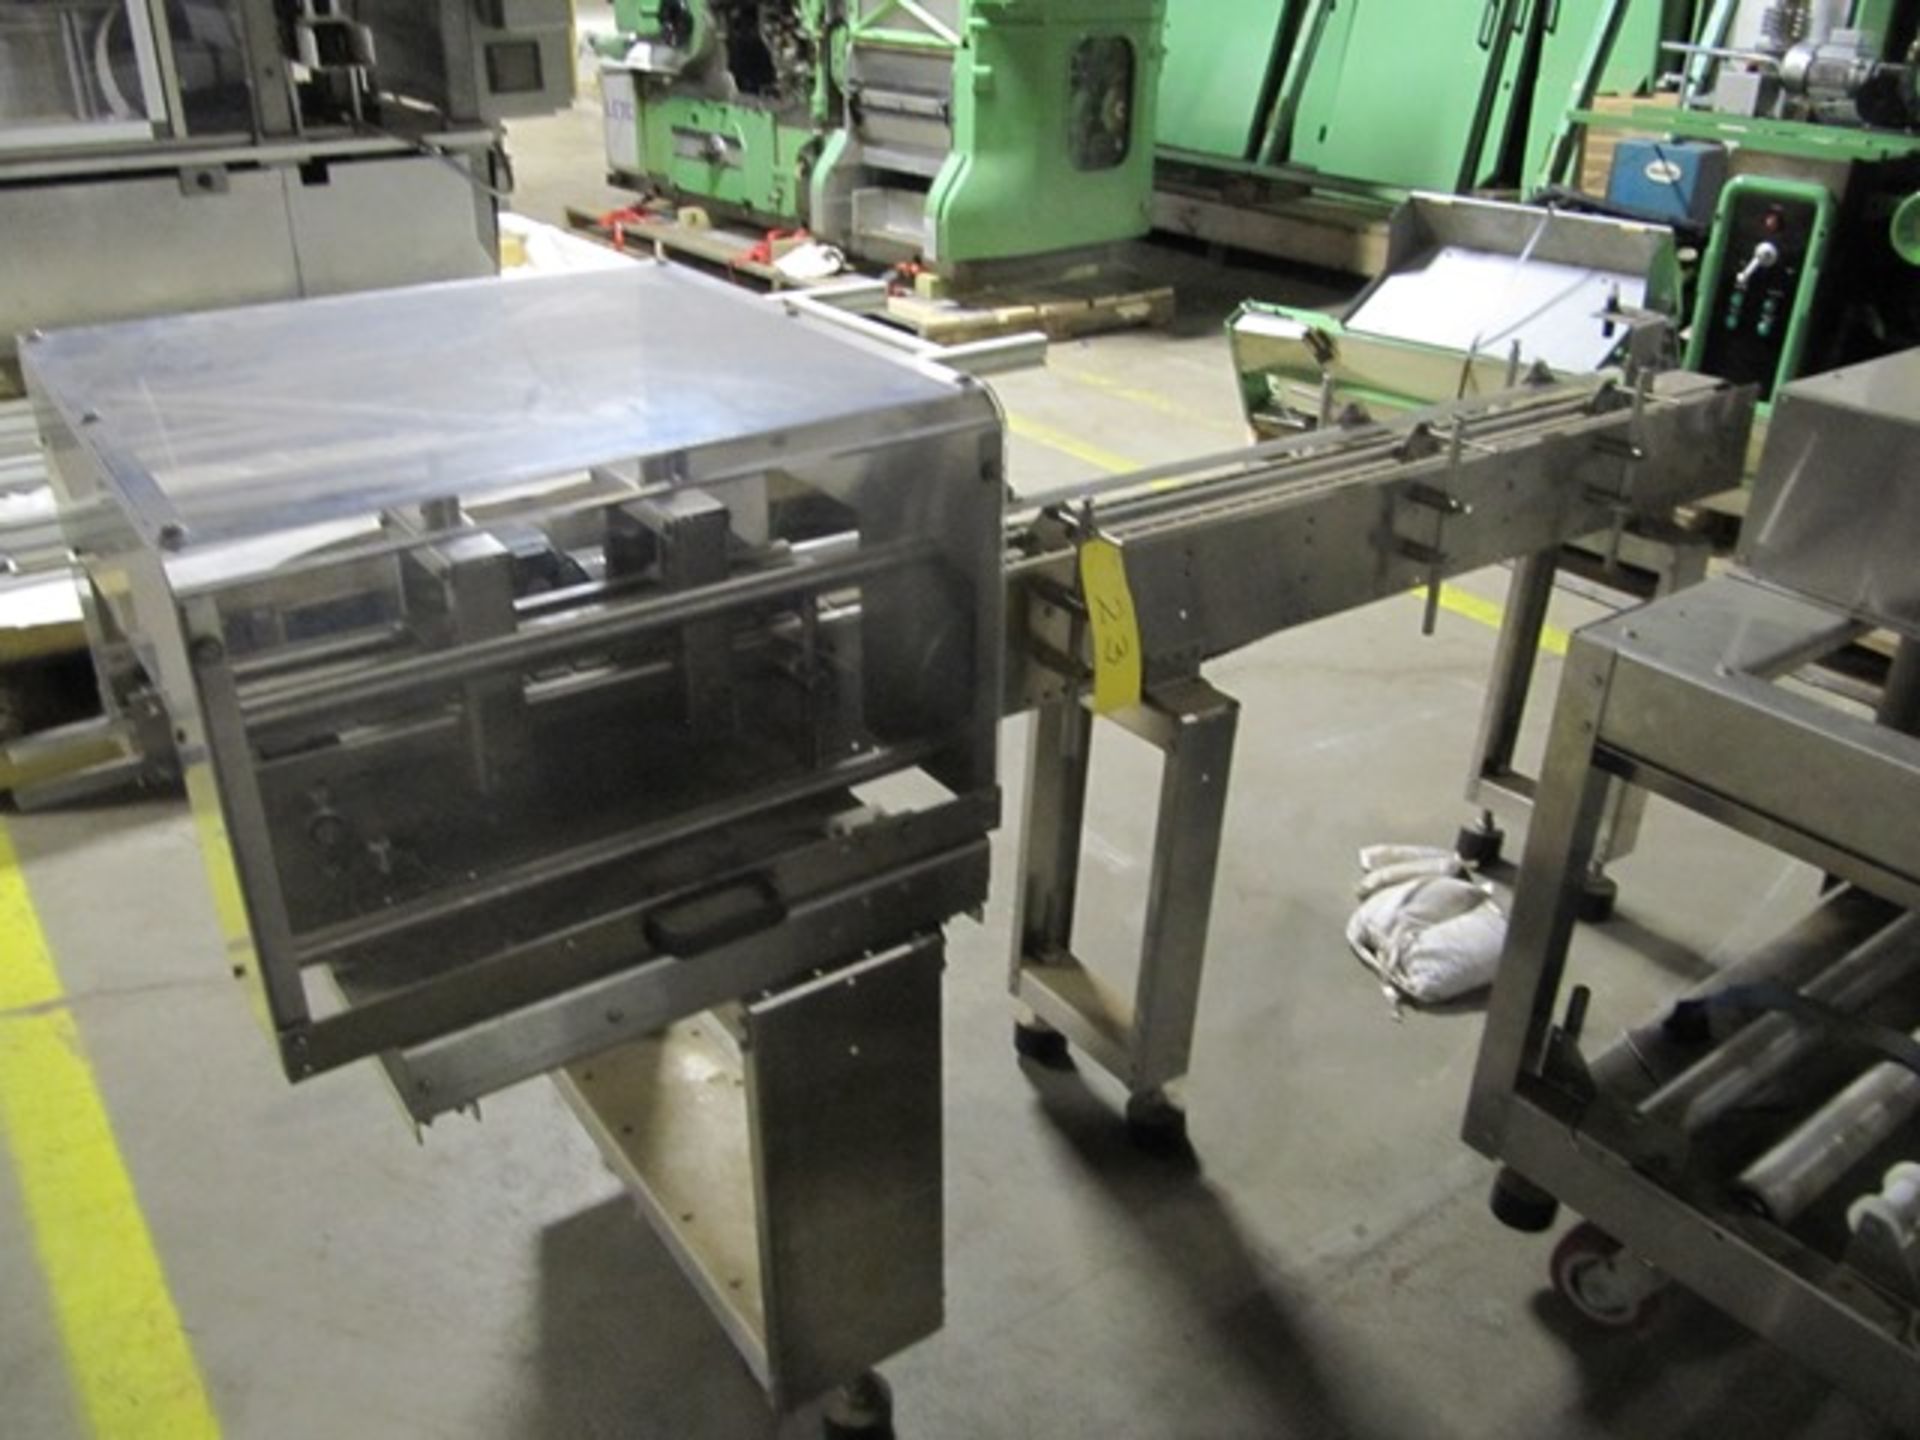 POLY PAK ILB-24DL OVER WRAPPER MACHINE W/INFEED CONVEYOR S/N: 3570 - Image 4 of 4